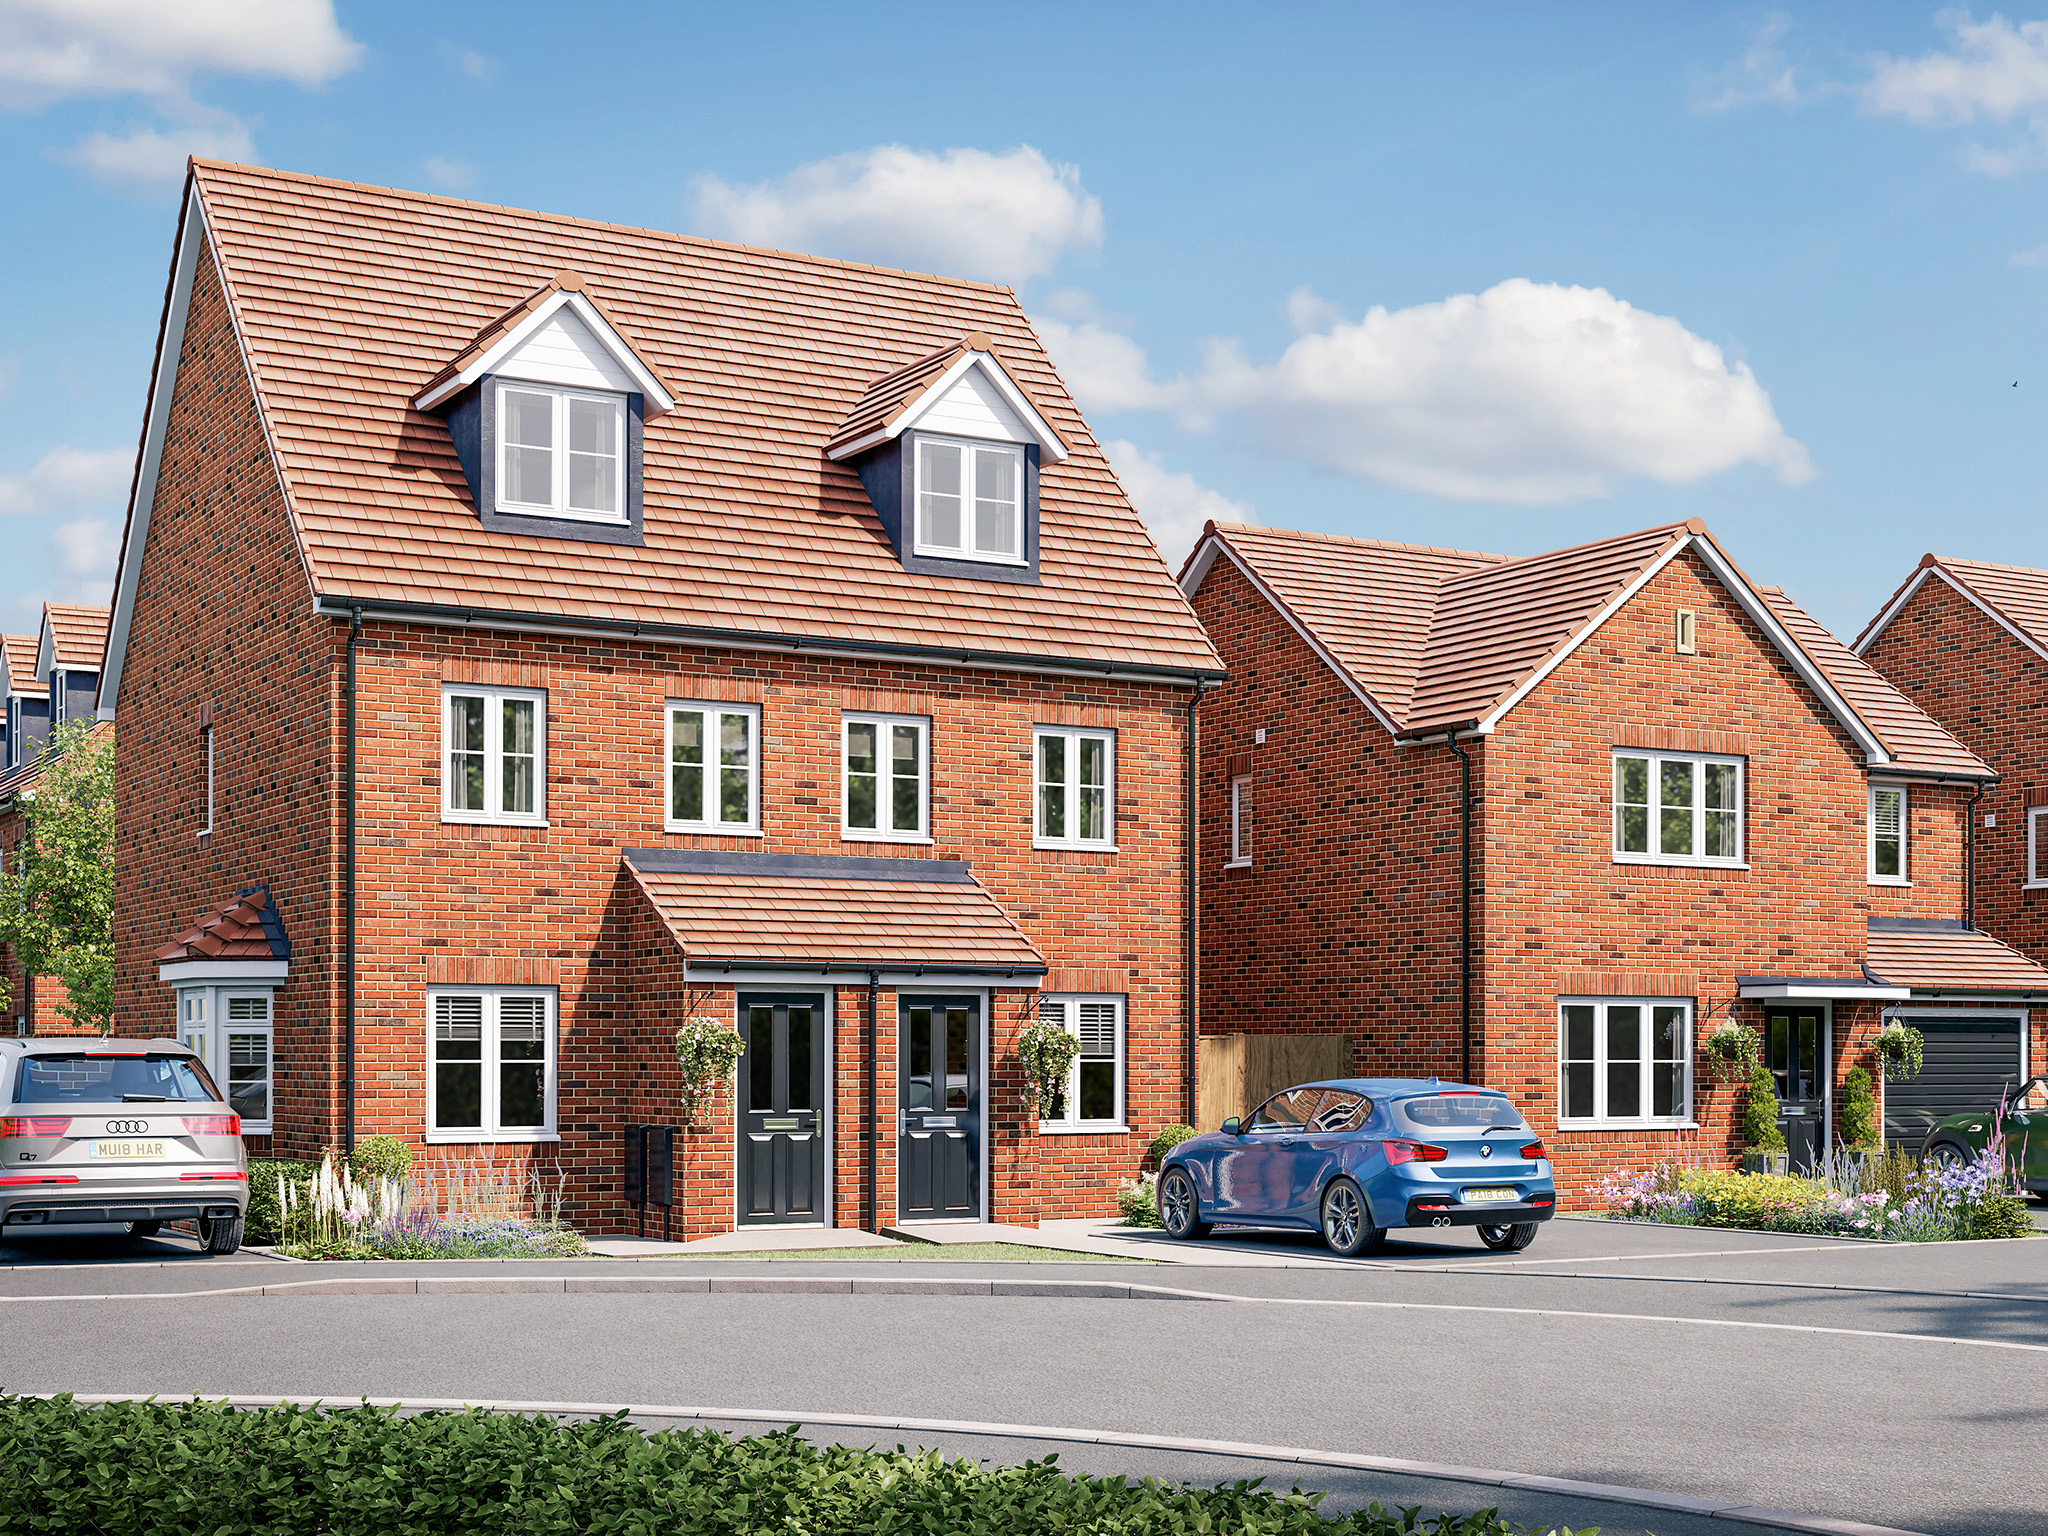 Persimmon Homes Coseley New Village - Dudley, West Midlands DY4 8AD - 01902 243304 | ShowMeLocal.com